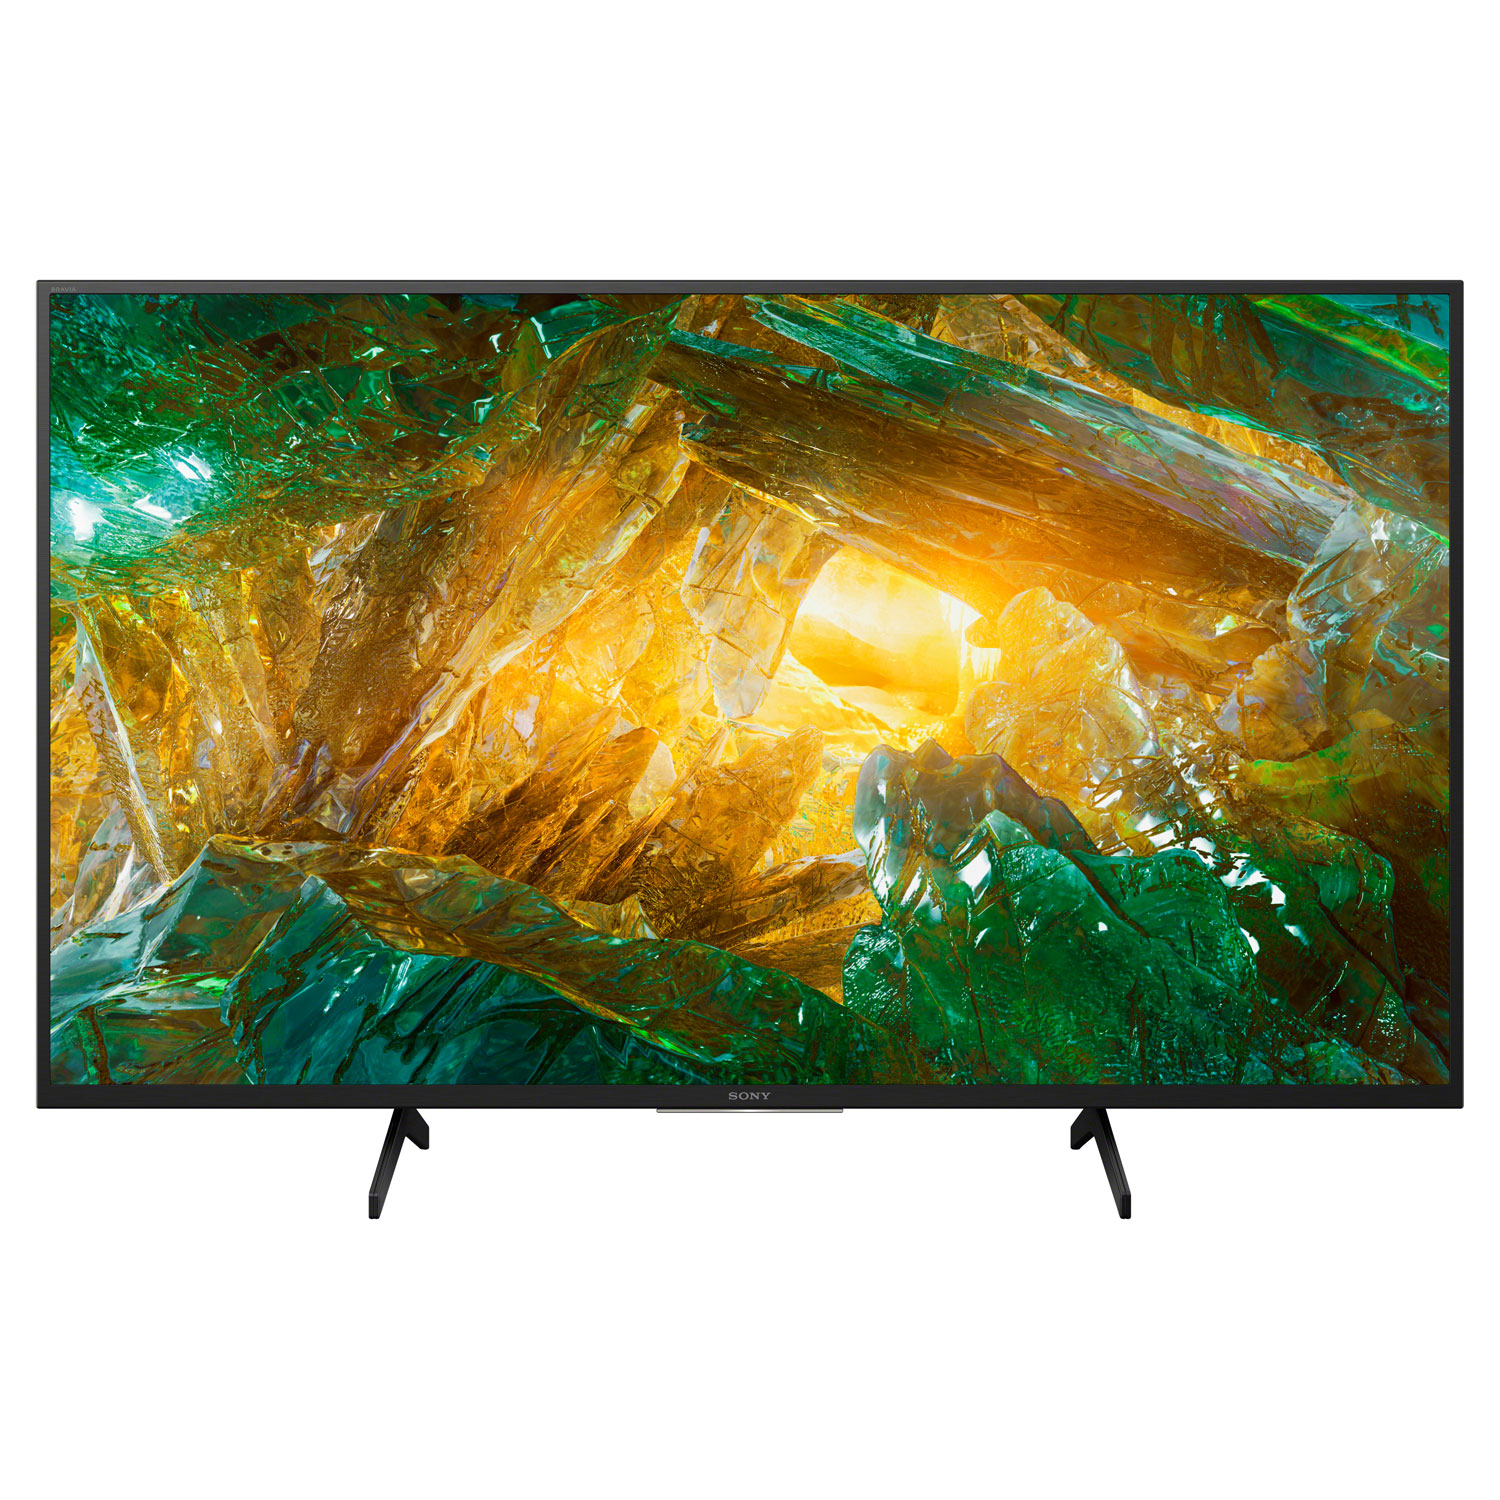 Sony 43" 4K UHD HDR LED Android Smart TV (XBR43X800H)